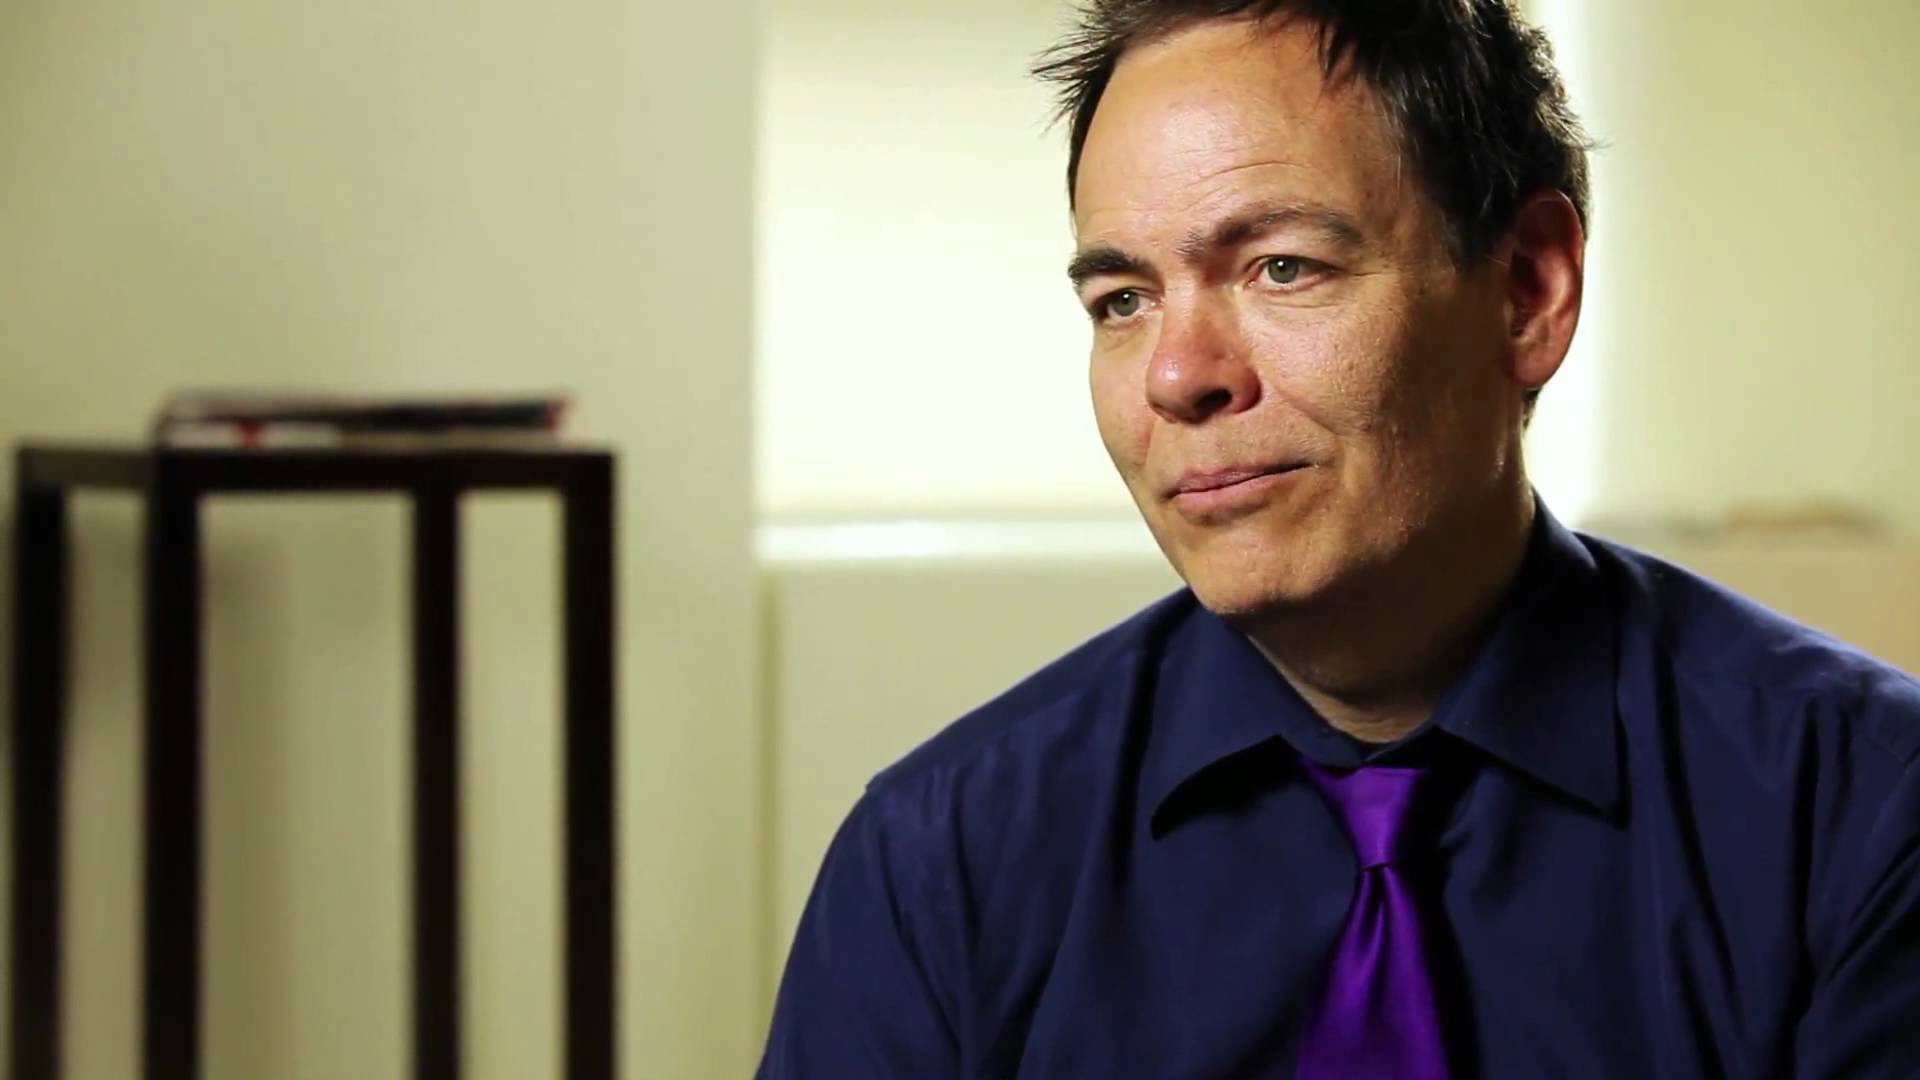 ‘Bankers Know They Can’t Stop Bitcoin’ – Says Max Keiser